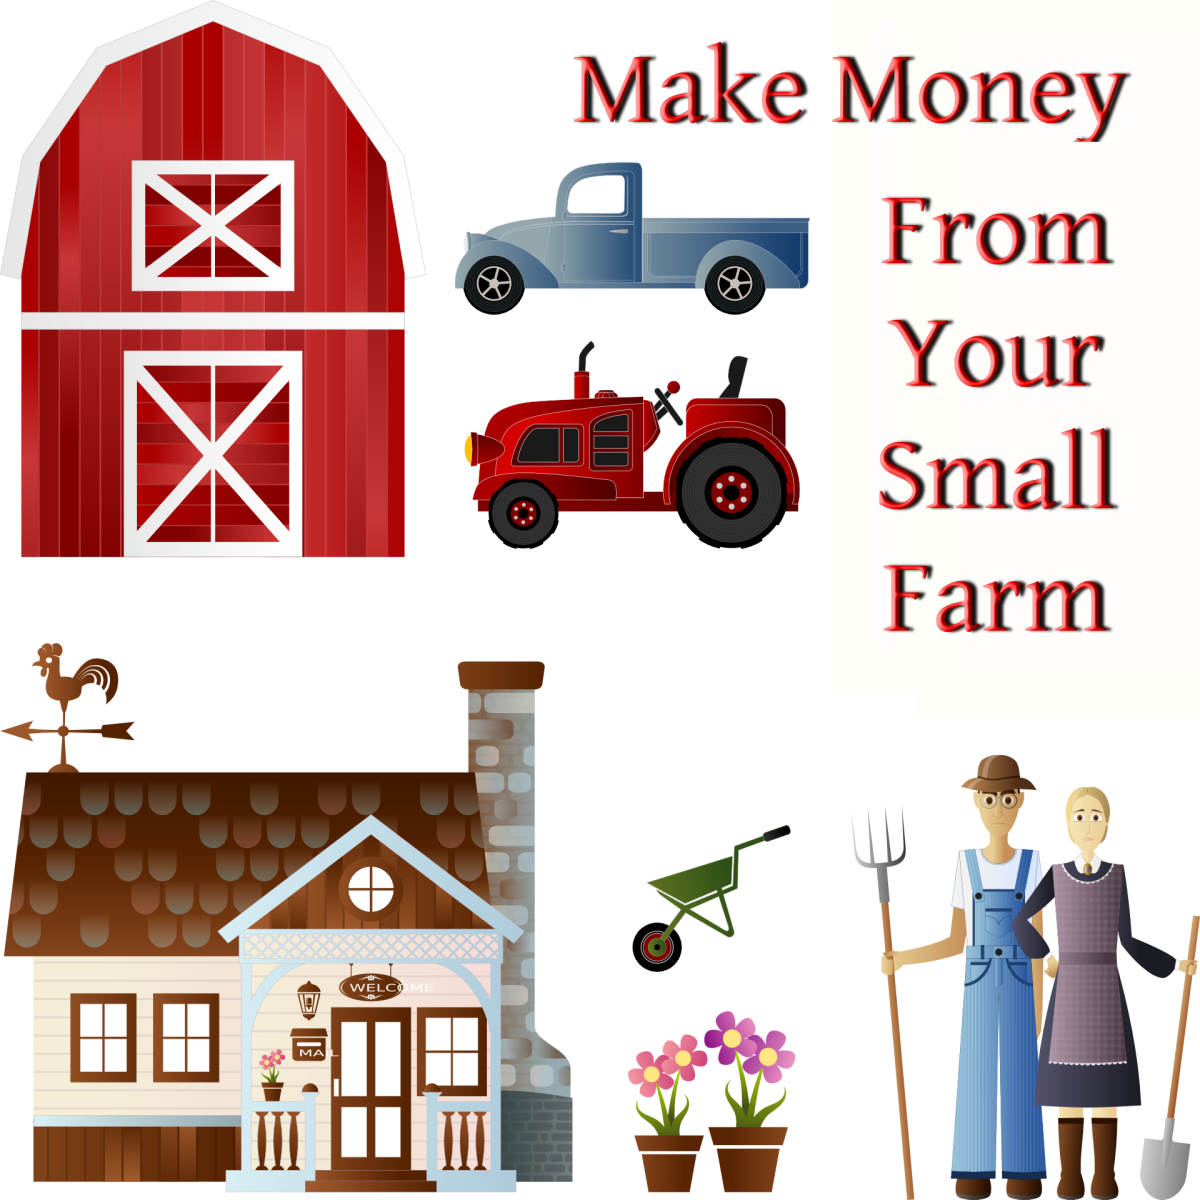 27 Ways To Make Money From Your Small Farm Toughnickel - 27 ways to make money from your small farm